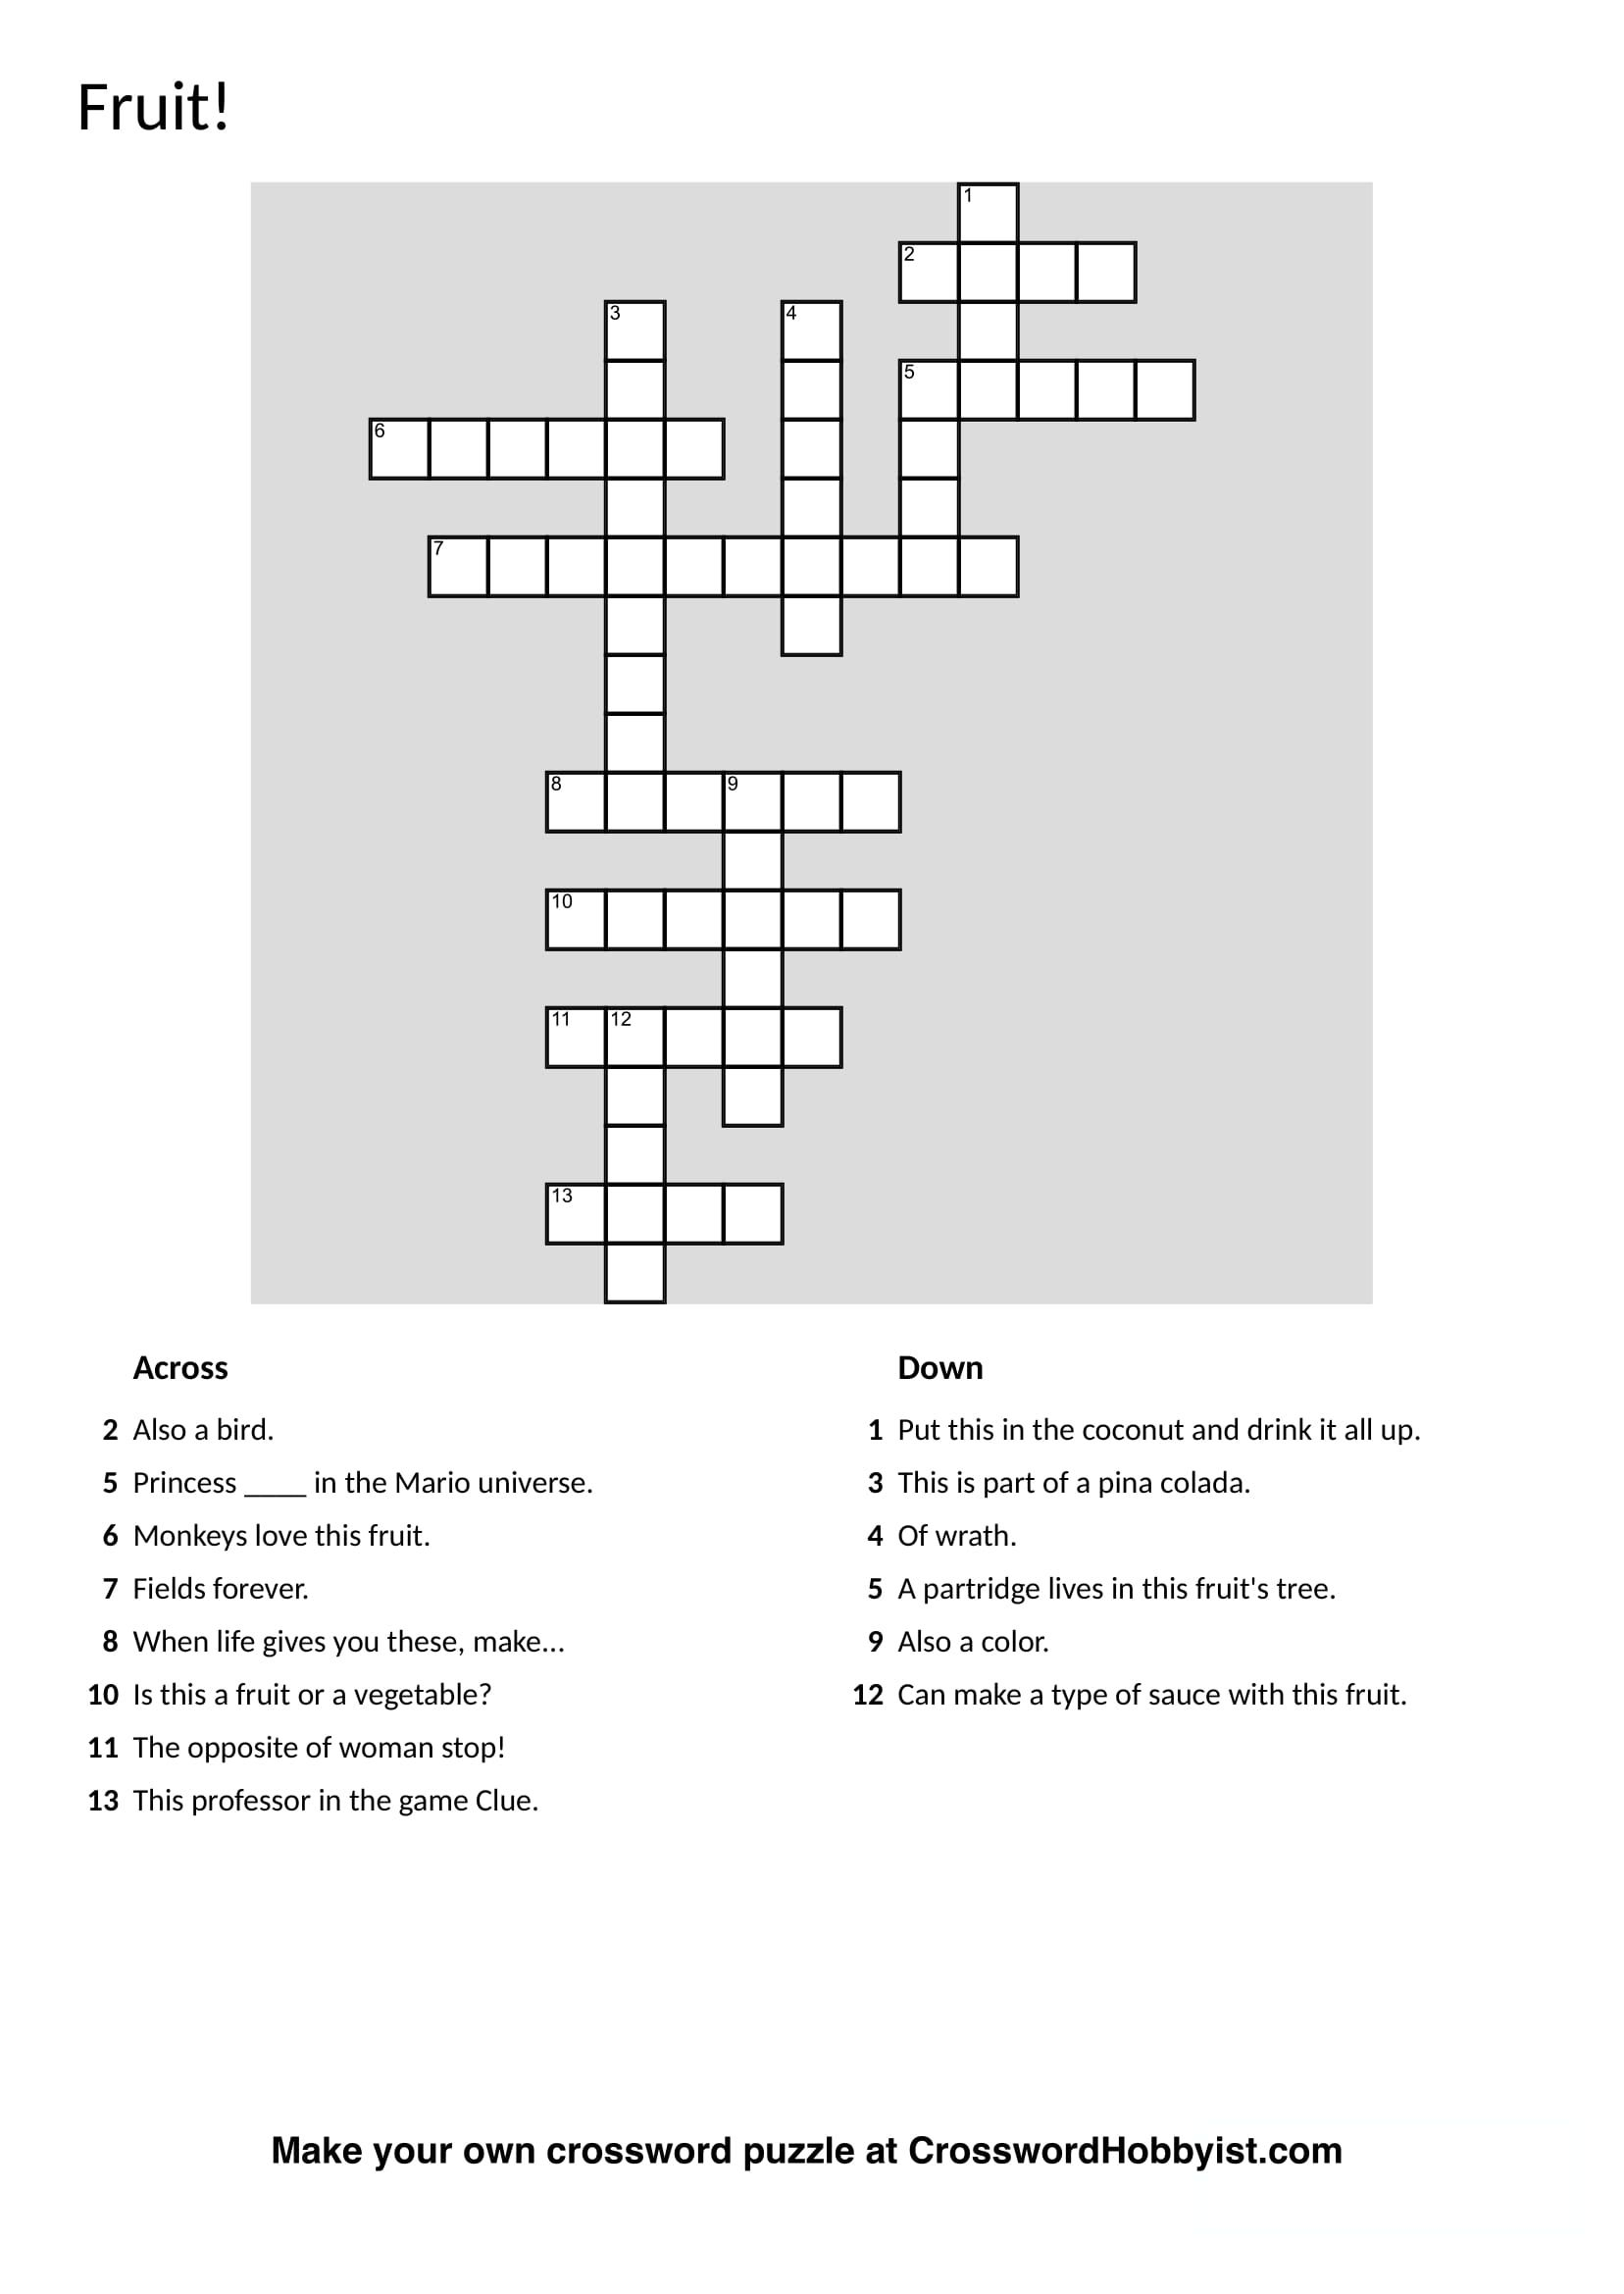 Make Your Own Fun Crossword Puzzles With Crosswordhobbyist - Free Make Your Own Crosswords Printable